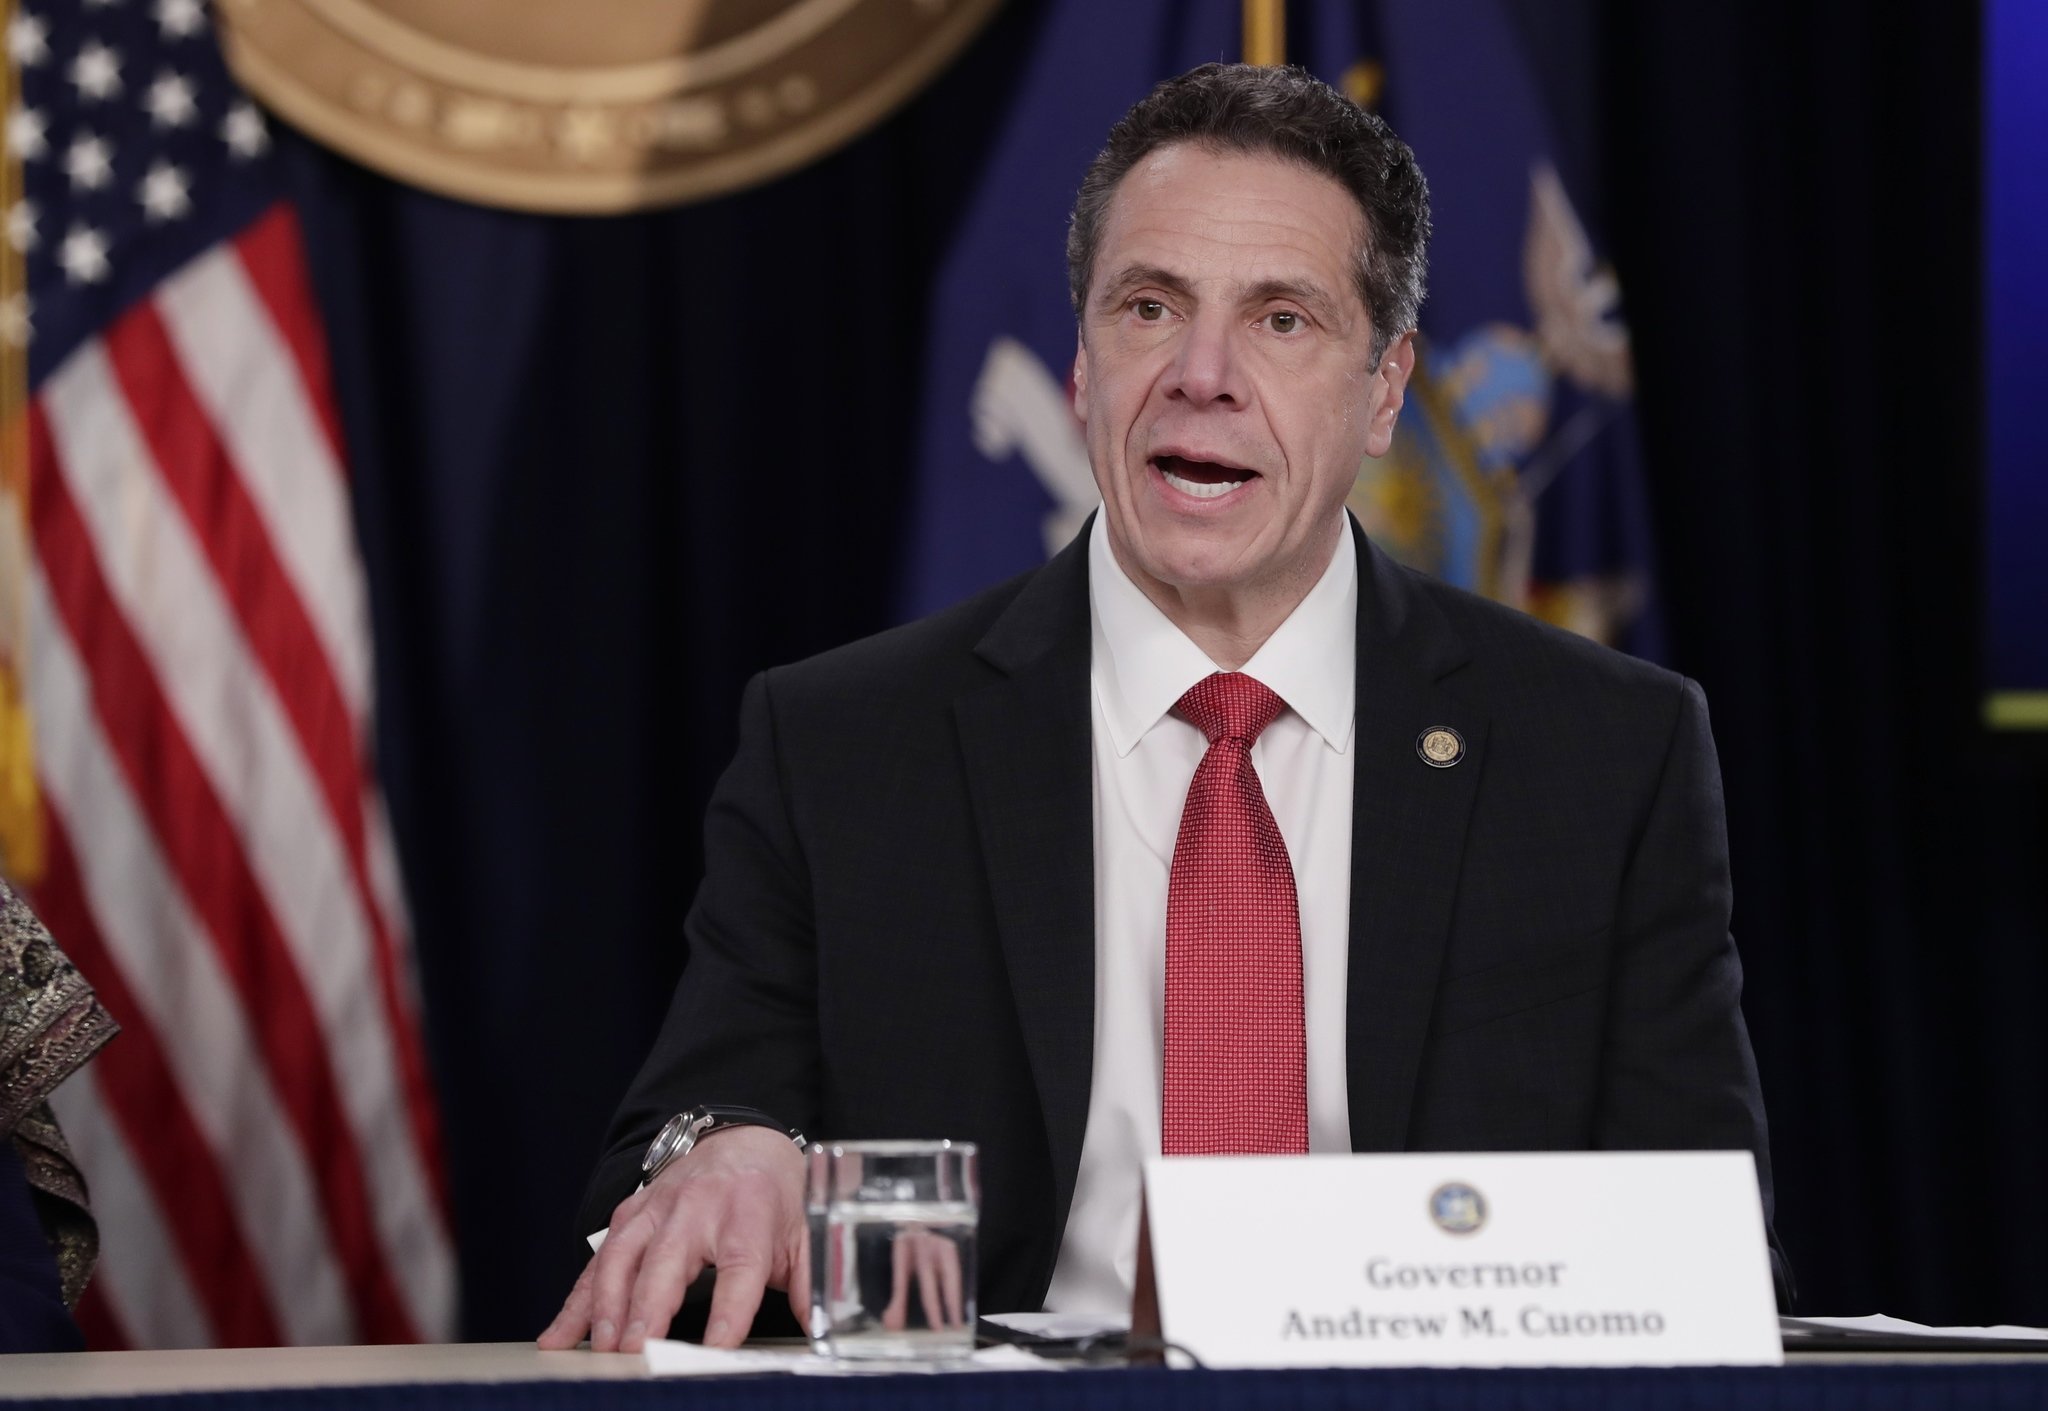 Cuomo pleads with Trump after Texas school shooting: 'Do something'